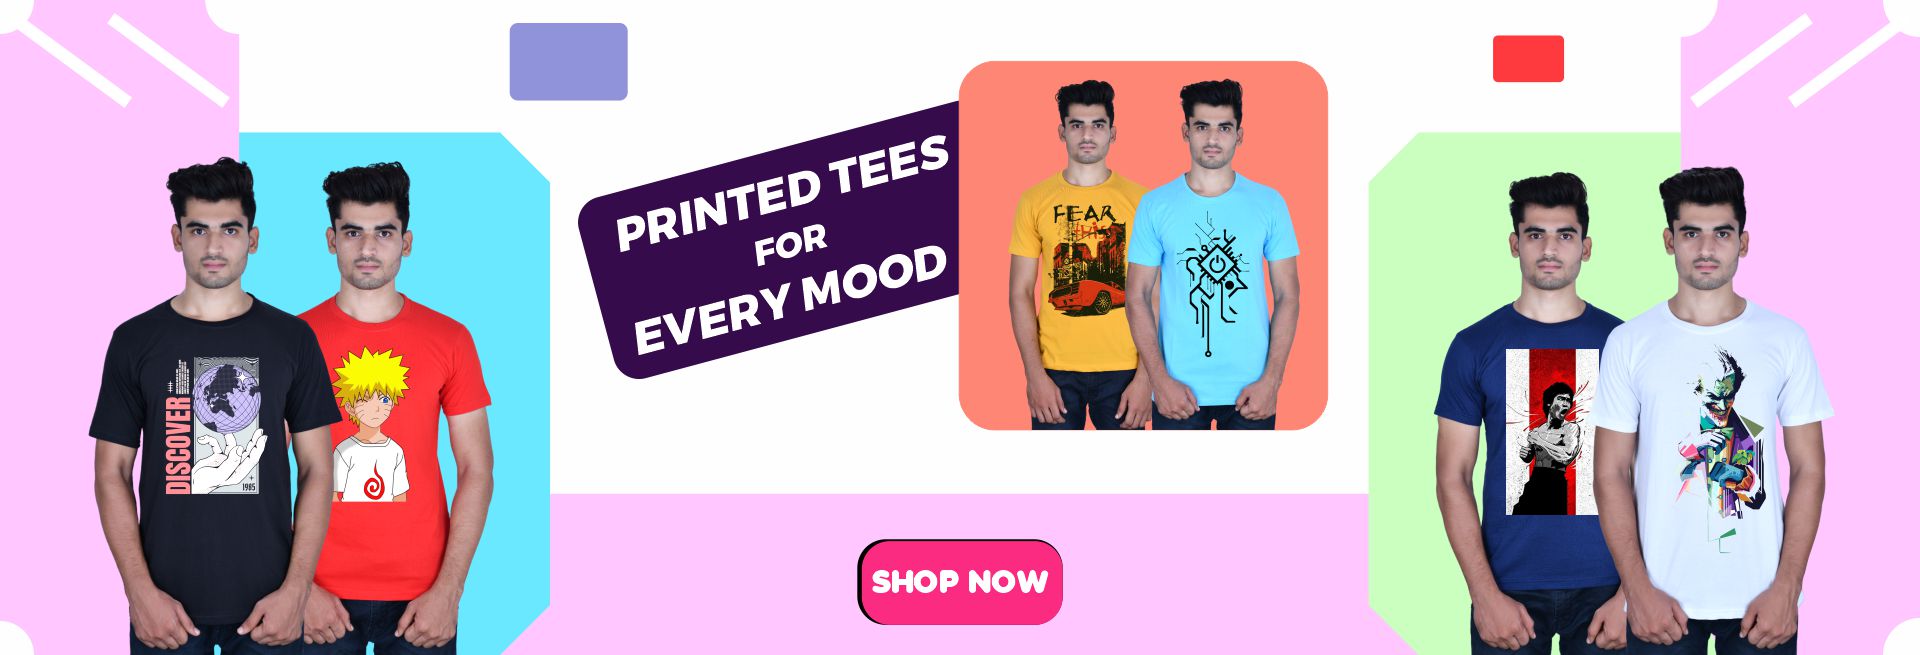 "The Blue Beast Customized T-Shirt Collection: Colorful Printed Tees for Men and Women"